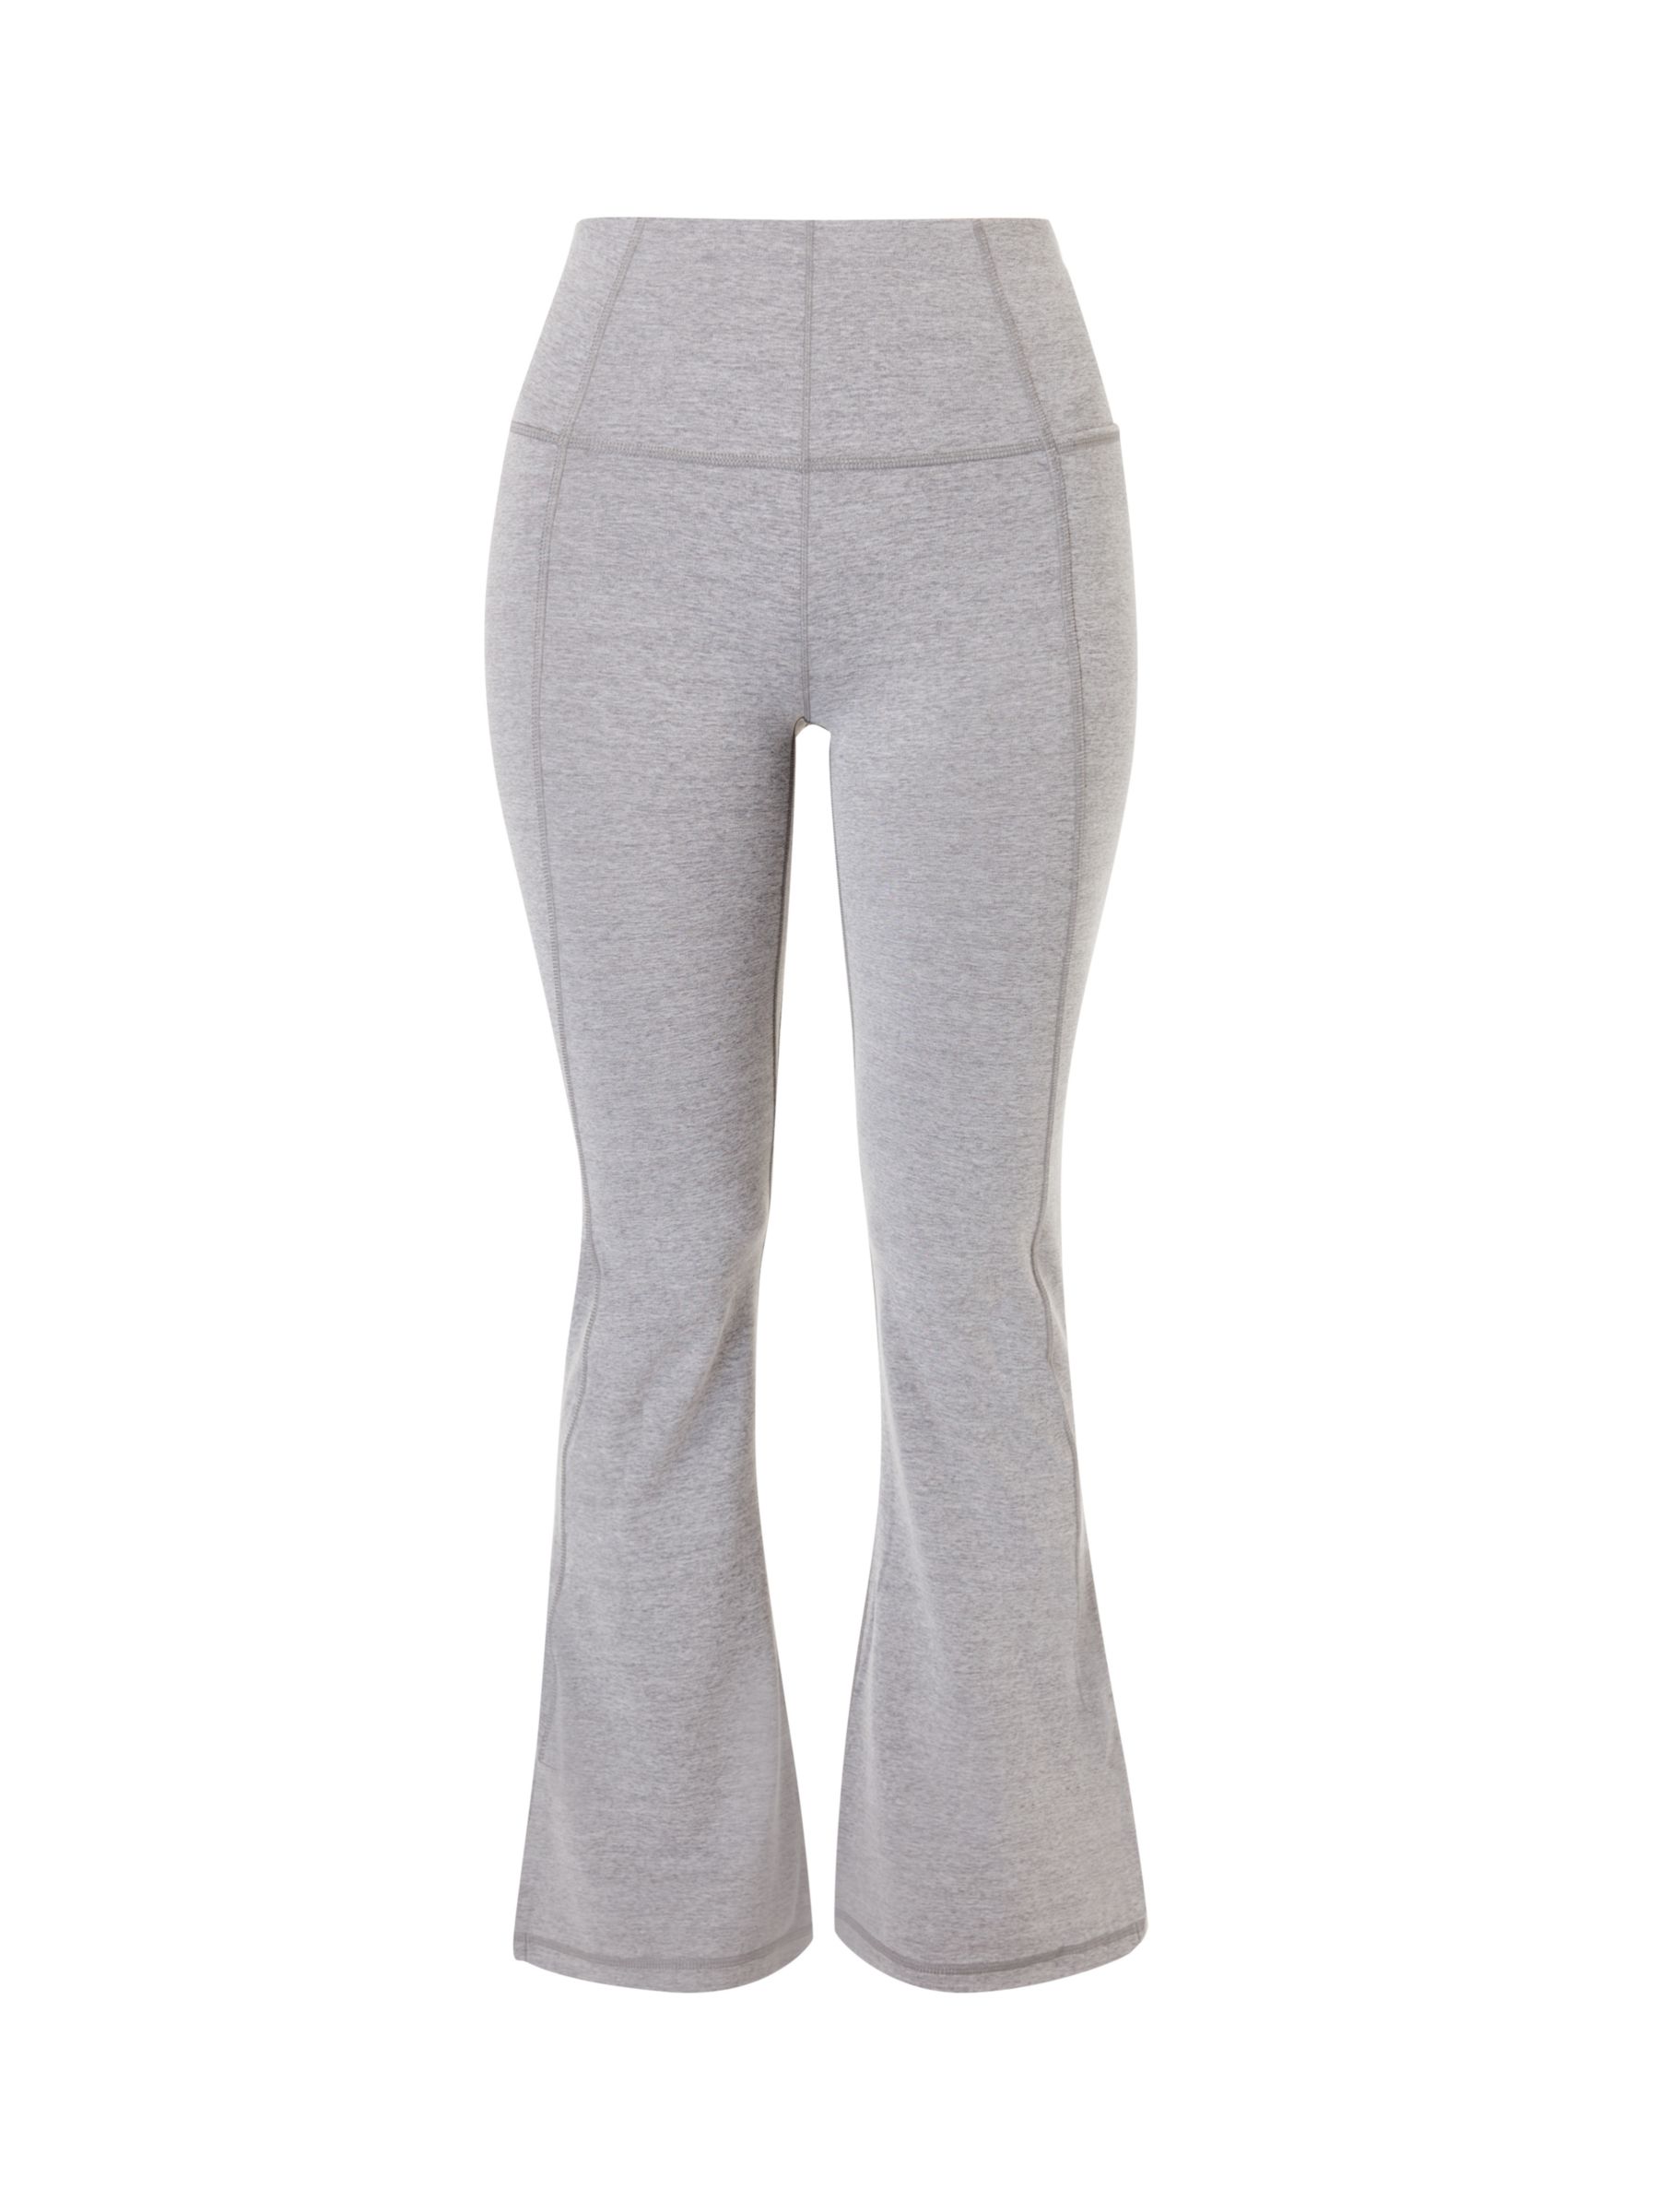 Buy Sweaty Betty Super Soft 30" Flare Yoga Trousers Online at johnlewis.com